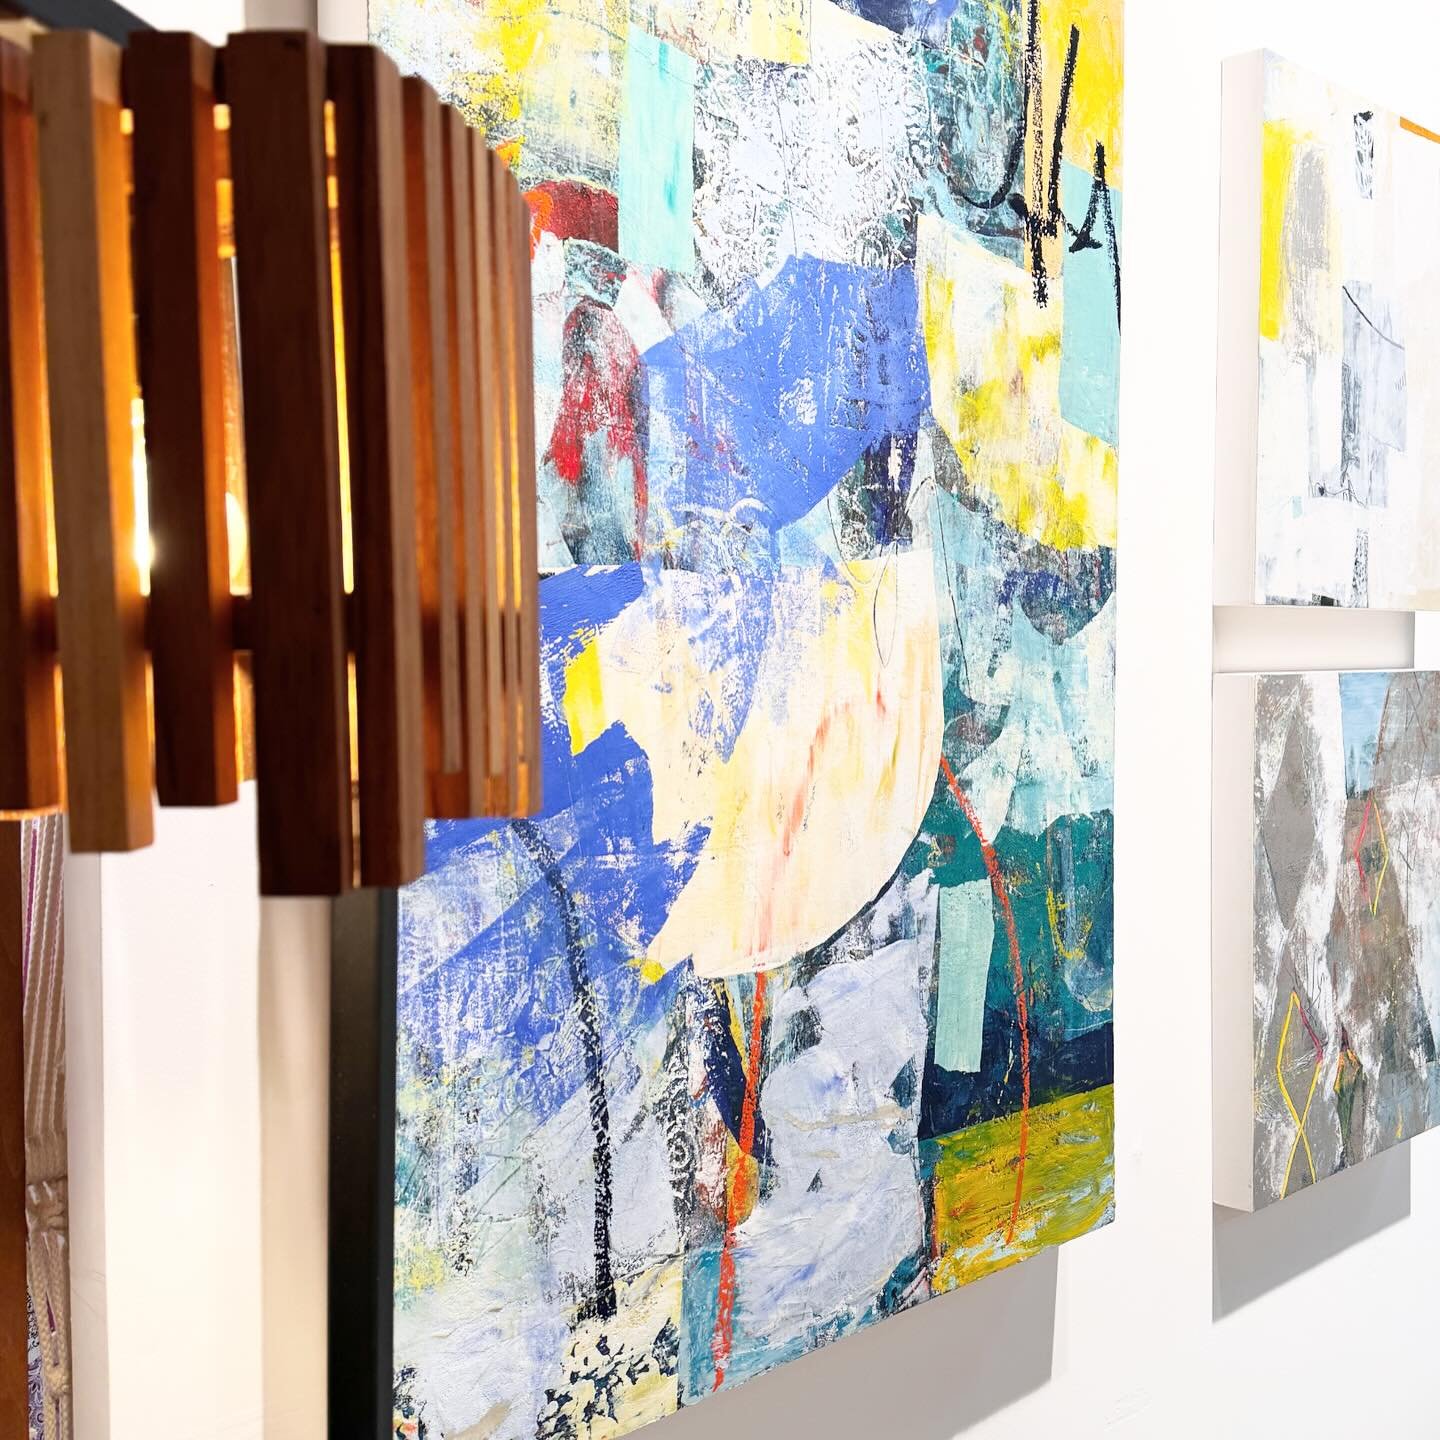 Ever wonder how a piece of art will look in your home? Visit our pop-up at Oystera and experience new artwork set amongst Made in Mexico and Baja furnishings to help you decide! And just a reminder, join us on Friday (tomorrow May 10) for a special s